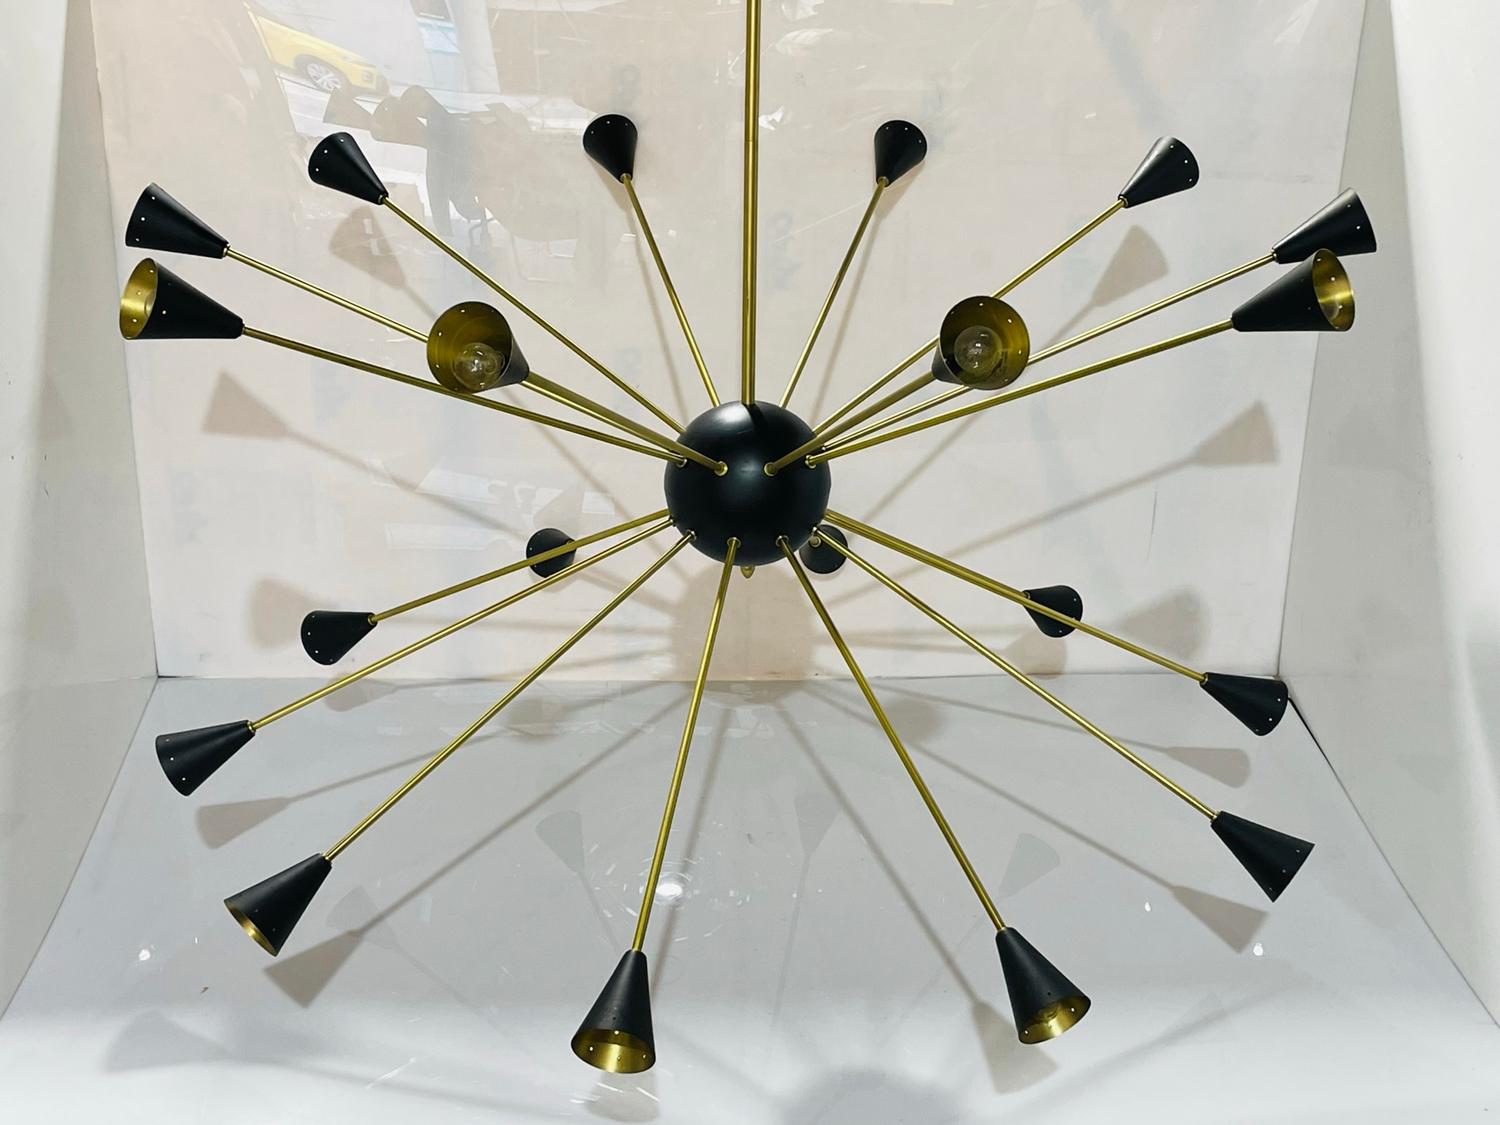 Very large Sputnik style chandelier in solid brass with black finish light shades and center ball.
The piece is very beautiful and imposing in person, the arms come off for easy transport/shipping.
Measurements:
66 inches high x 56 inches in